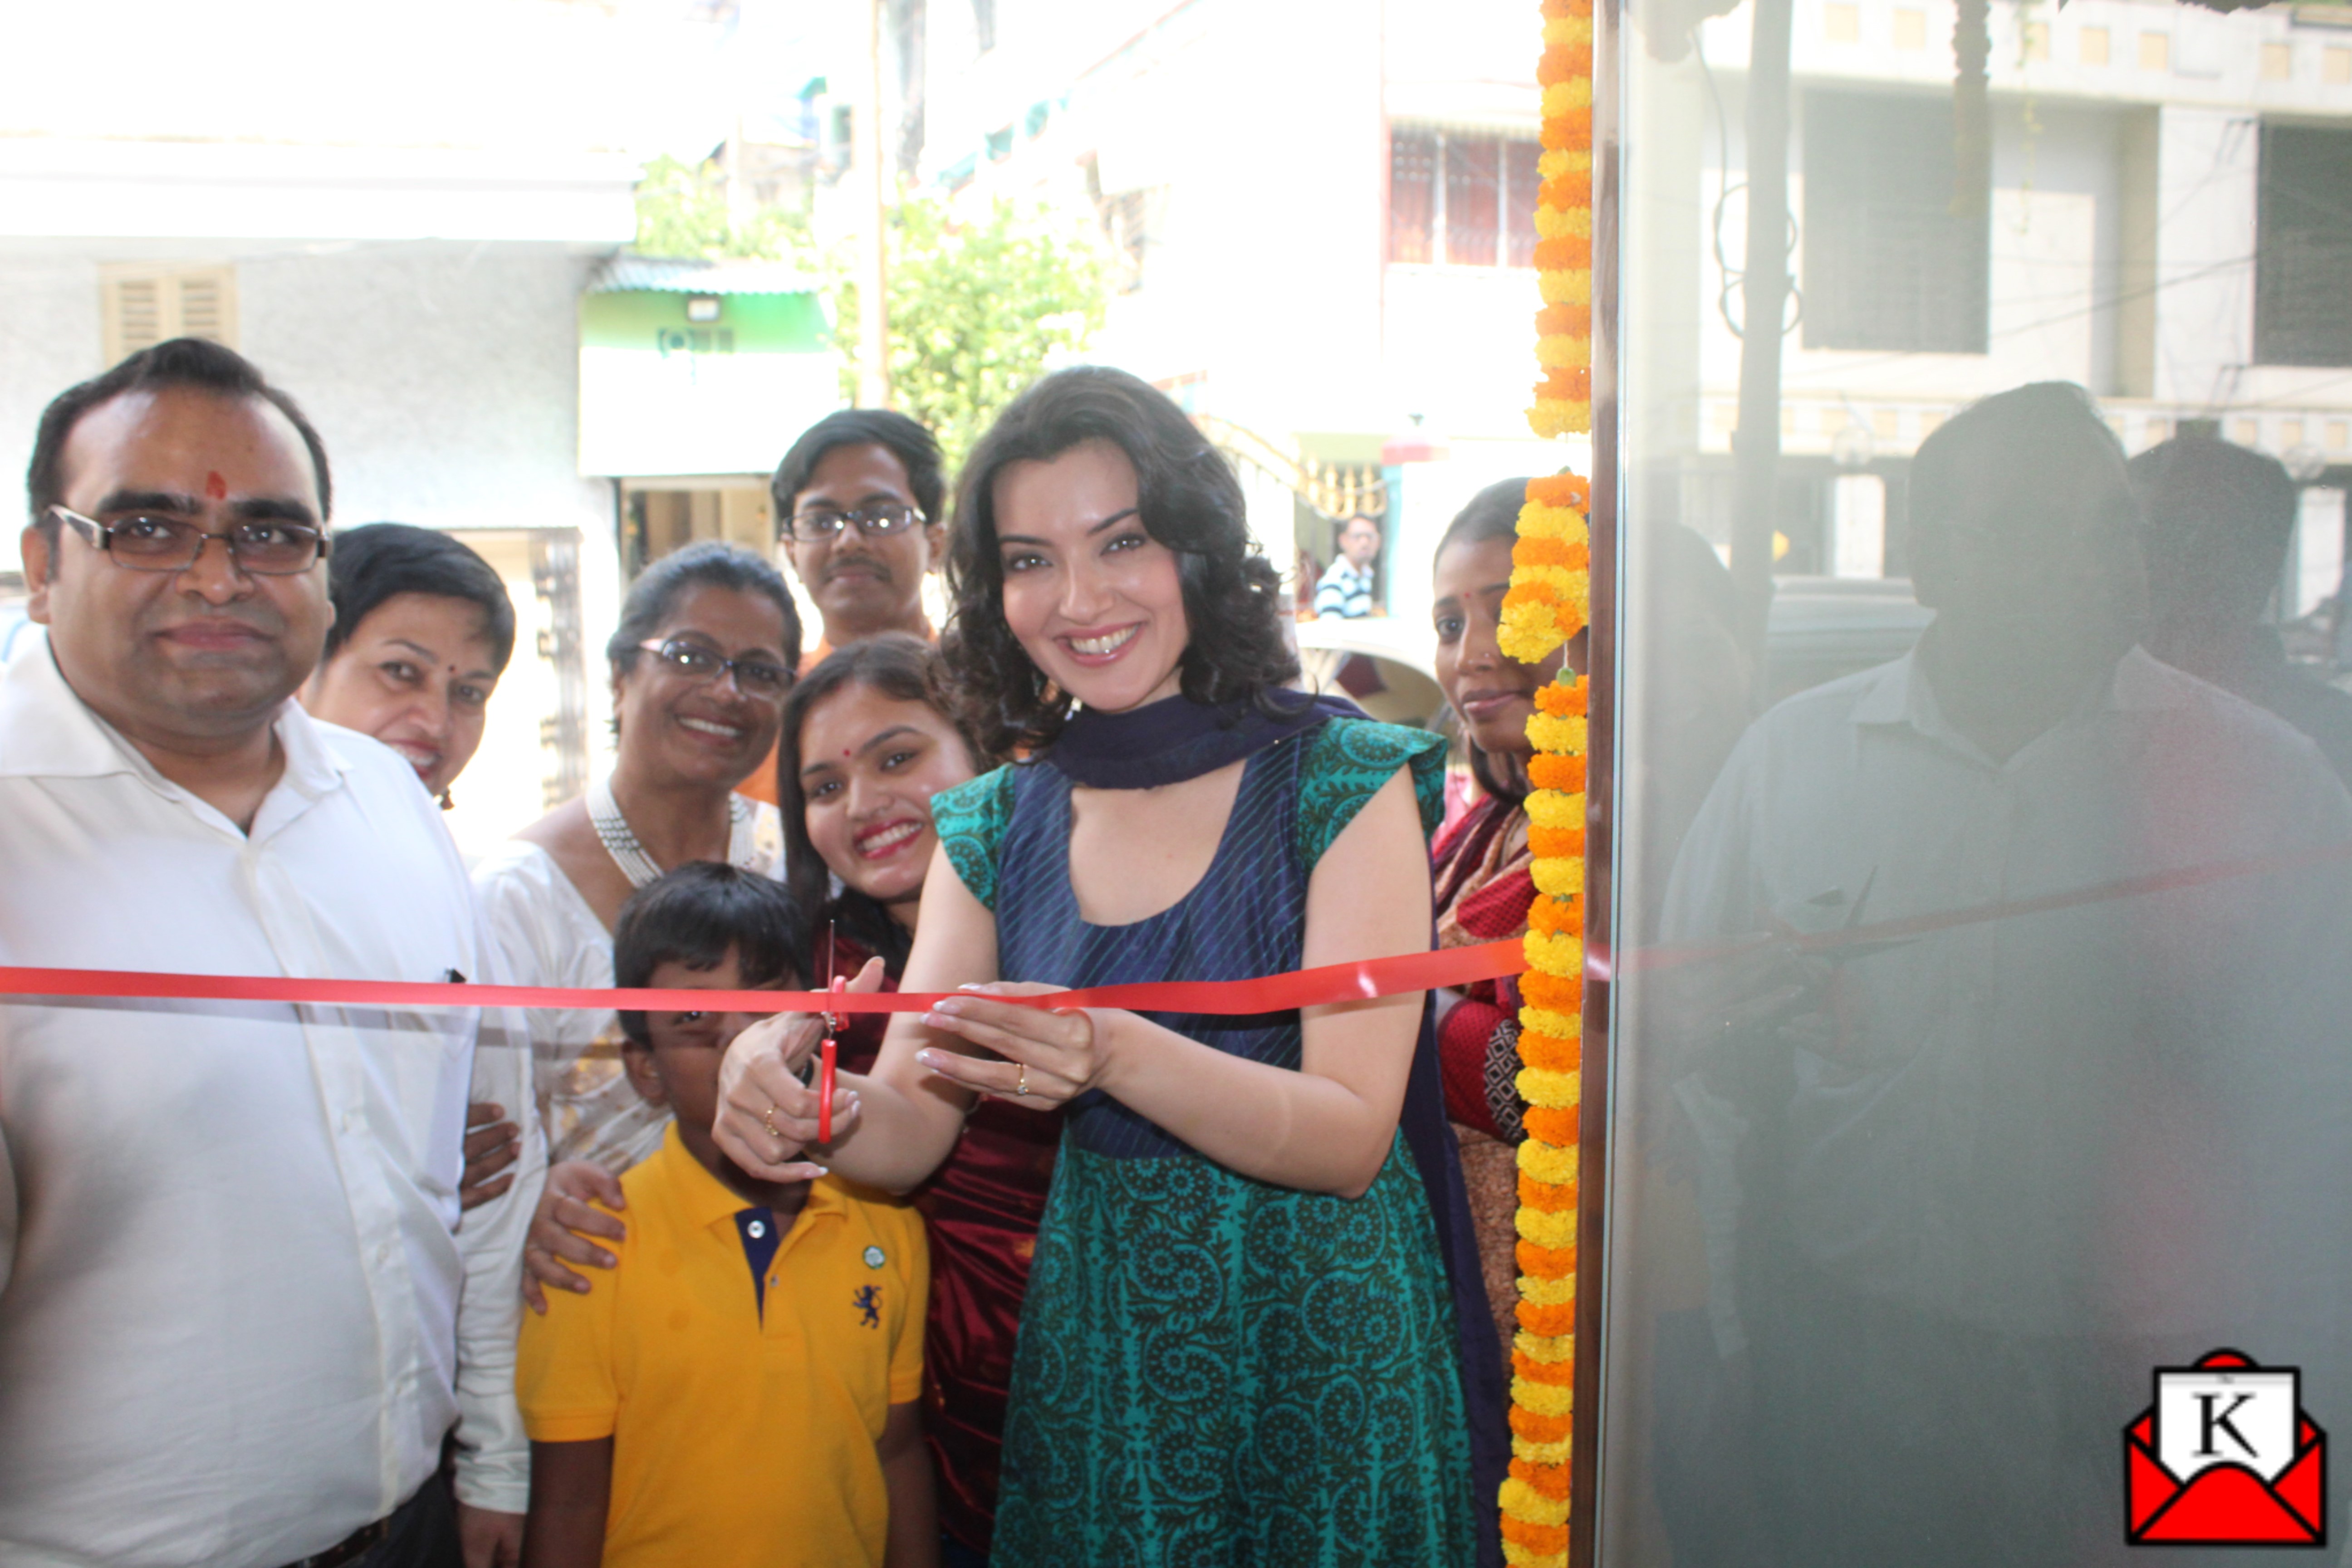 Teeth Care Multispeciality Dental Clinic Inaugurated in South Kolkata by Actress Arpita Chatterjee